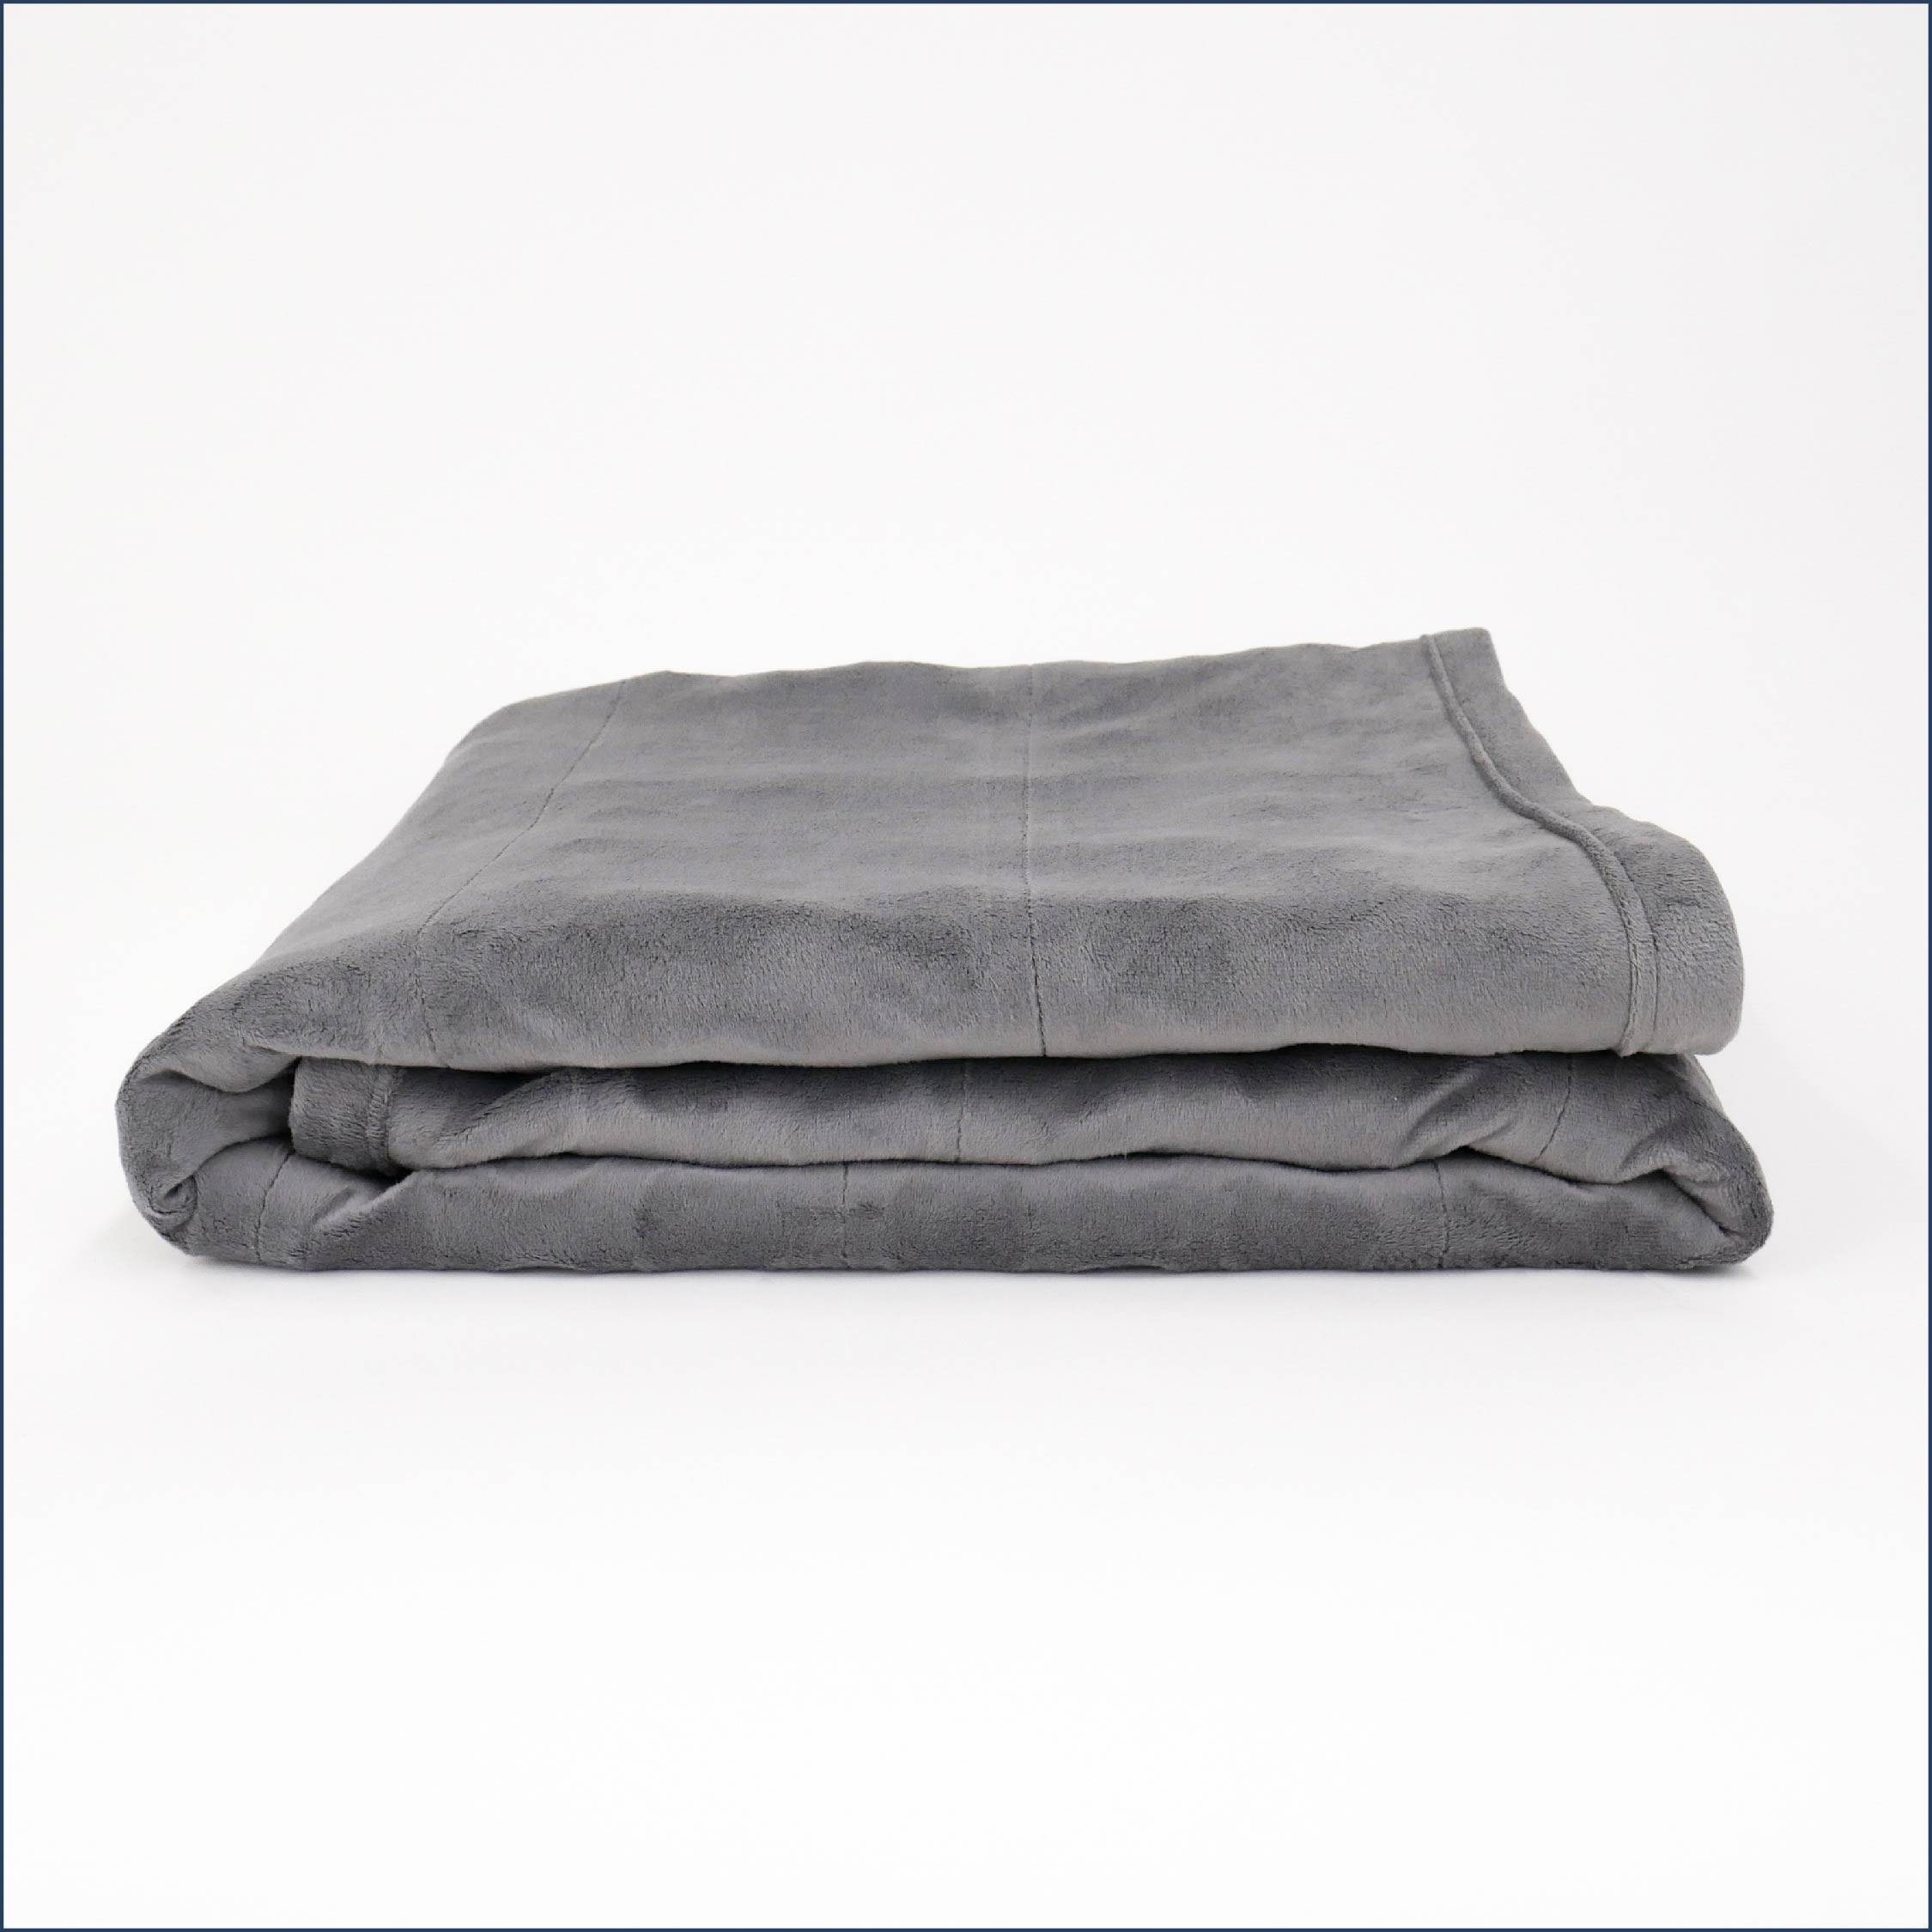 Tuc Cool weighted blanket folded